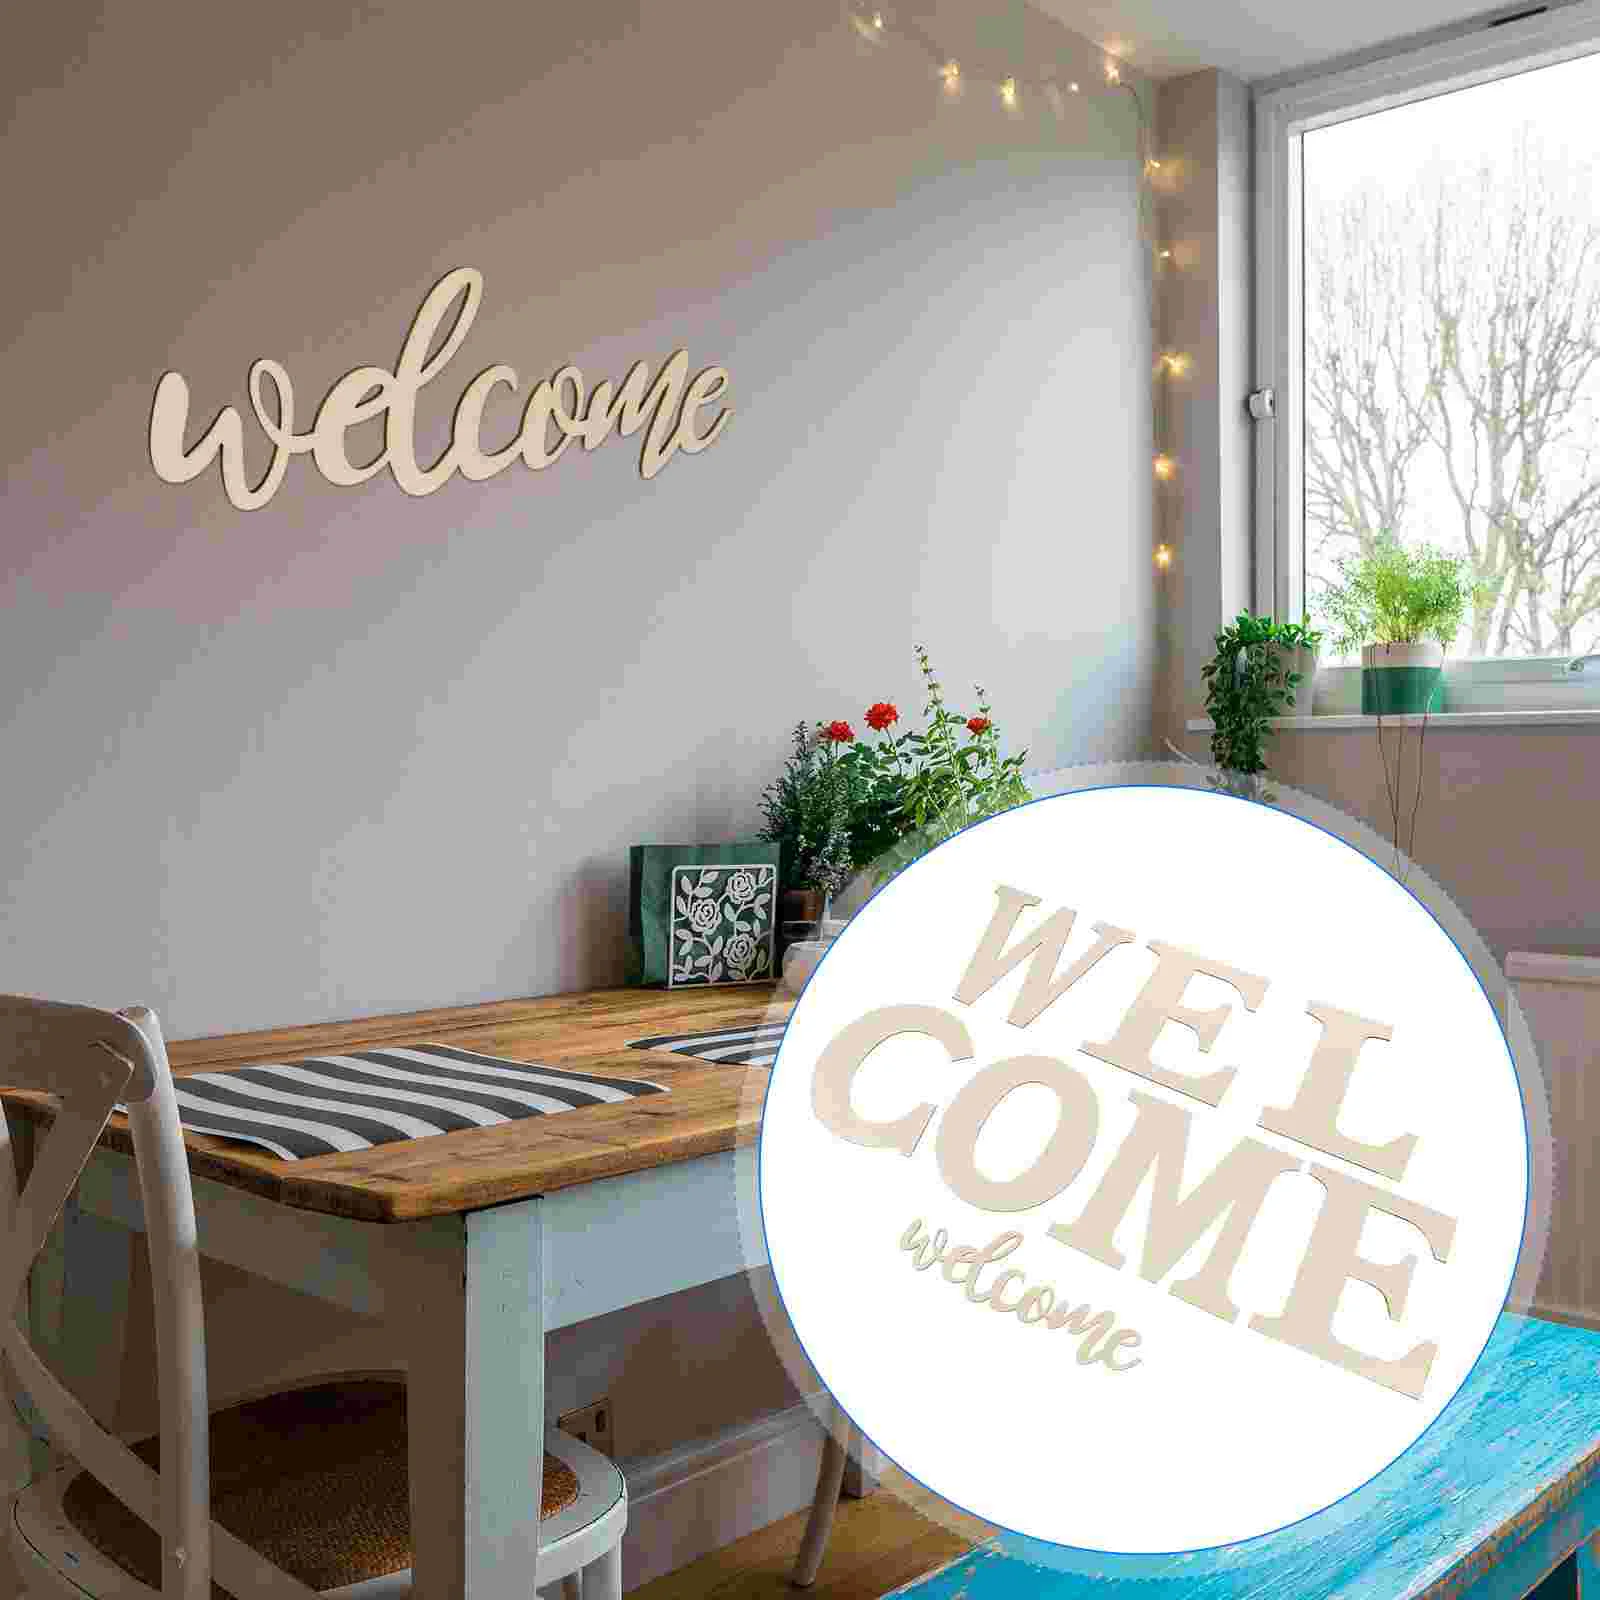 

Welcome Sign Wooden Wood Cutout Wall Decoration Hanging Signs Unfinished Words Rustic Letters Door Decorative Party Housewarming